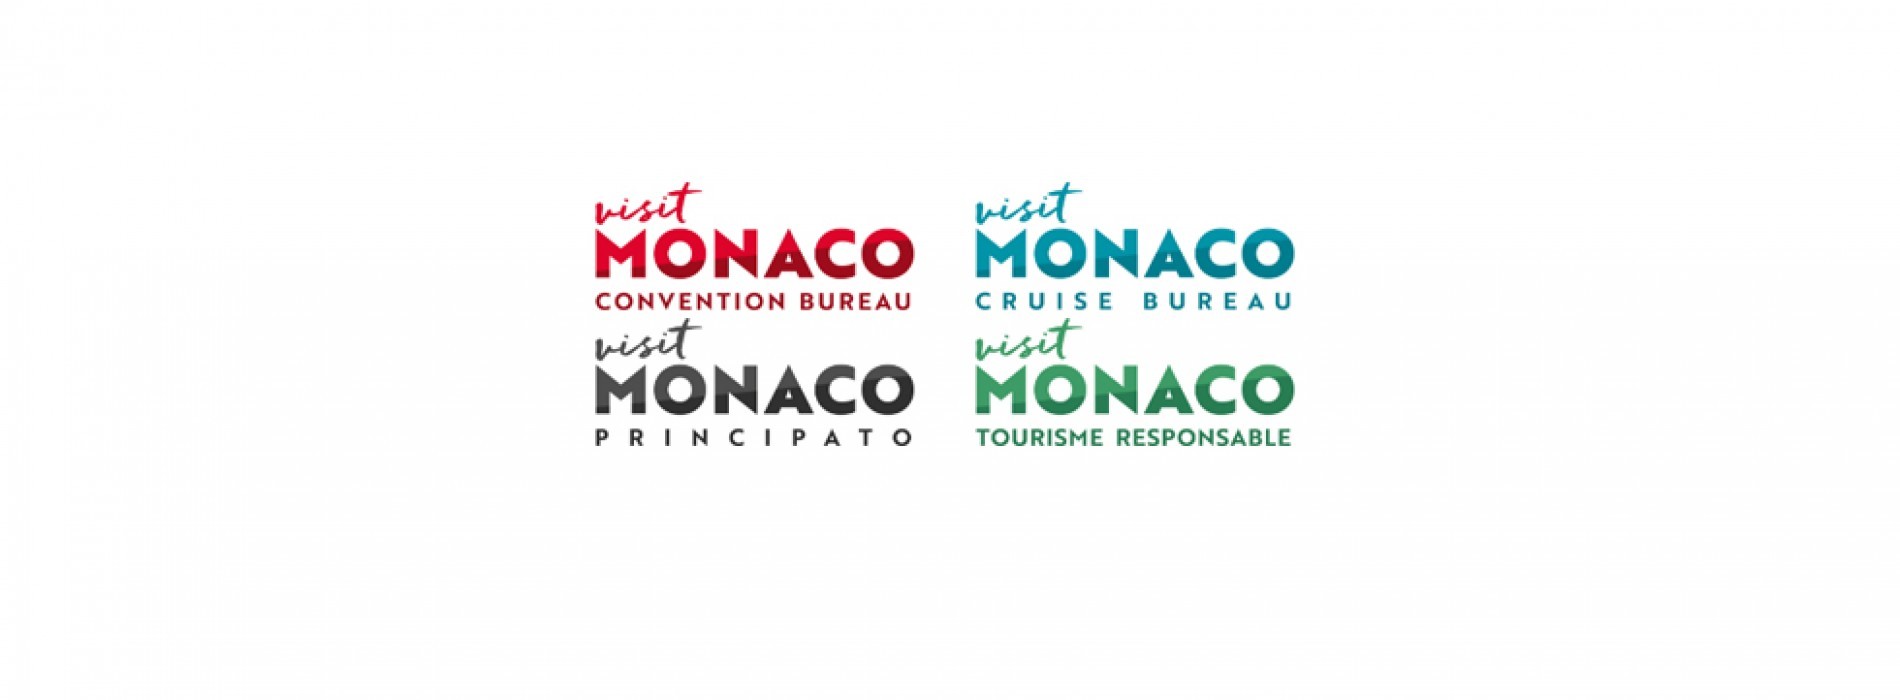 Visit Monaco launches a new global initiative ‘Green is the New Glam’